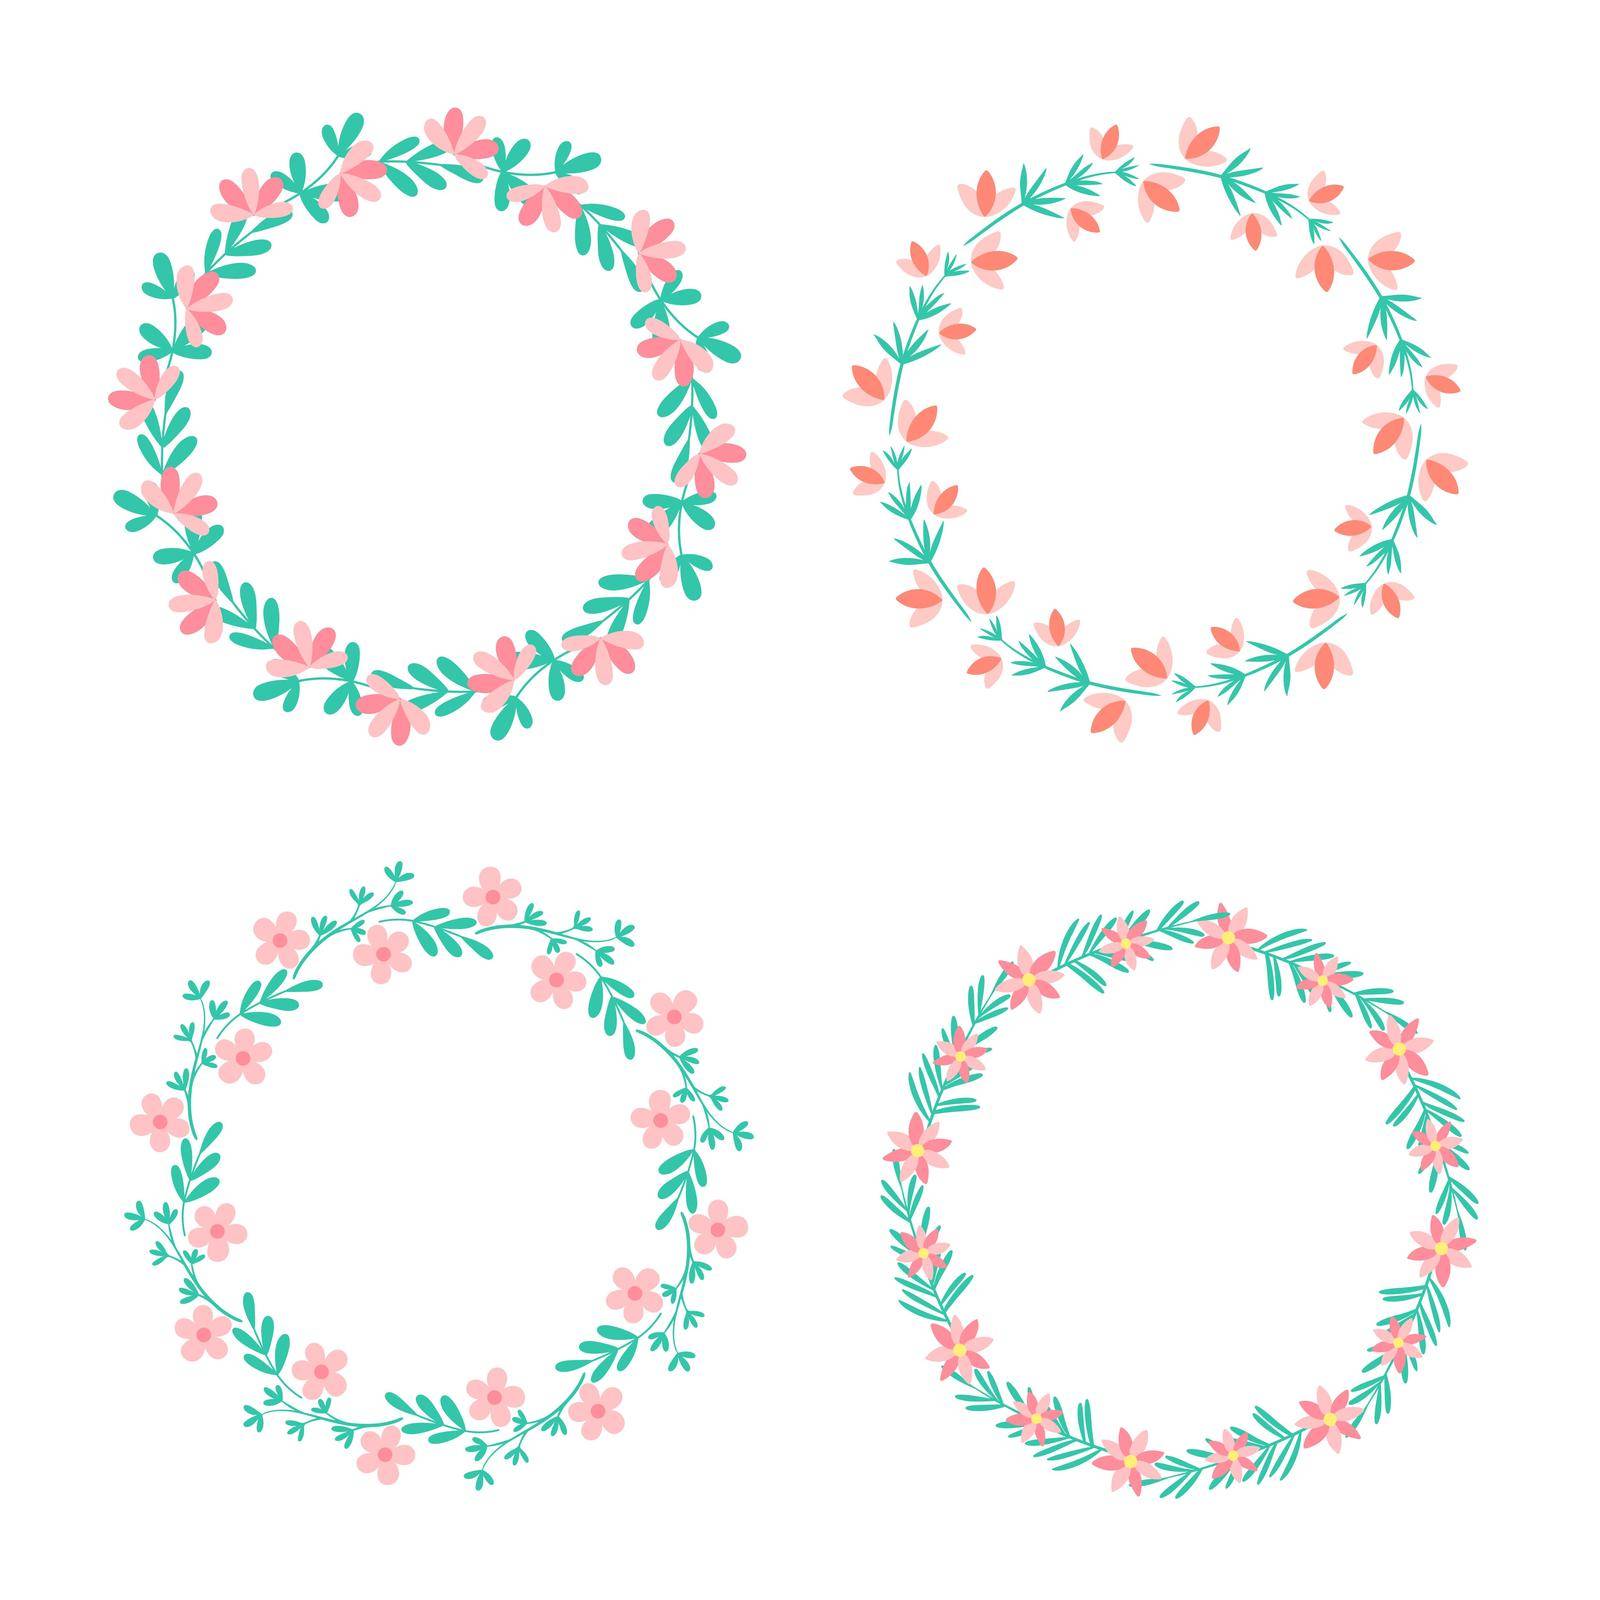 Round wreaths with spring and summer flowers set by TassiaK